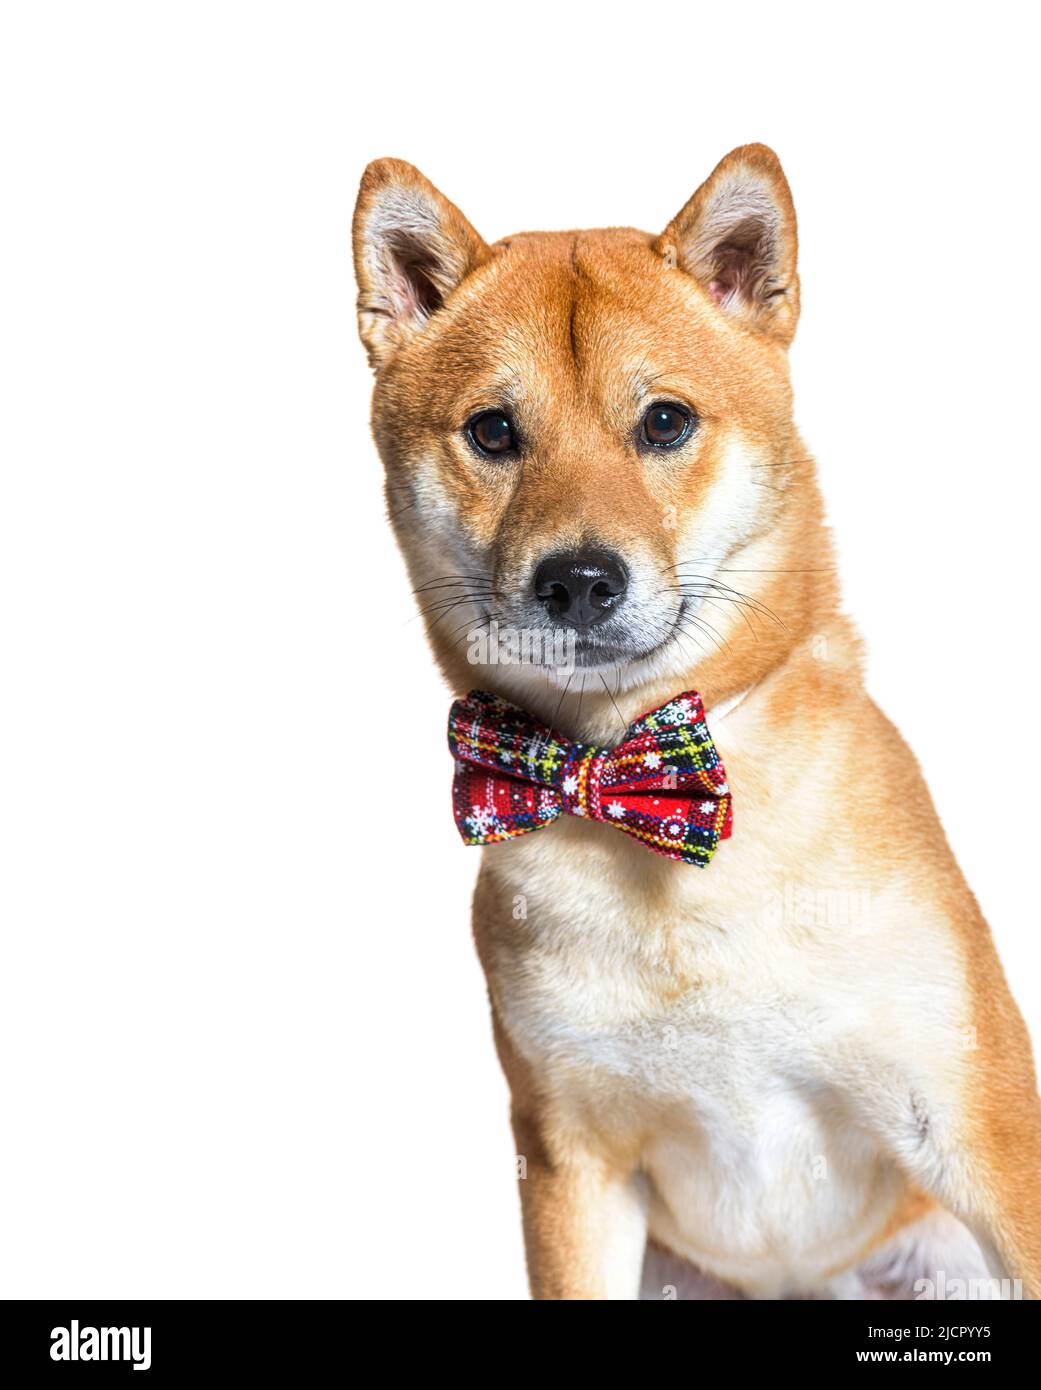 Shiba inu dog wearing a bow tie, isolated on white Stock Photo